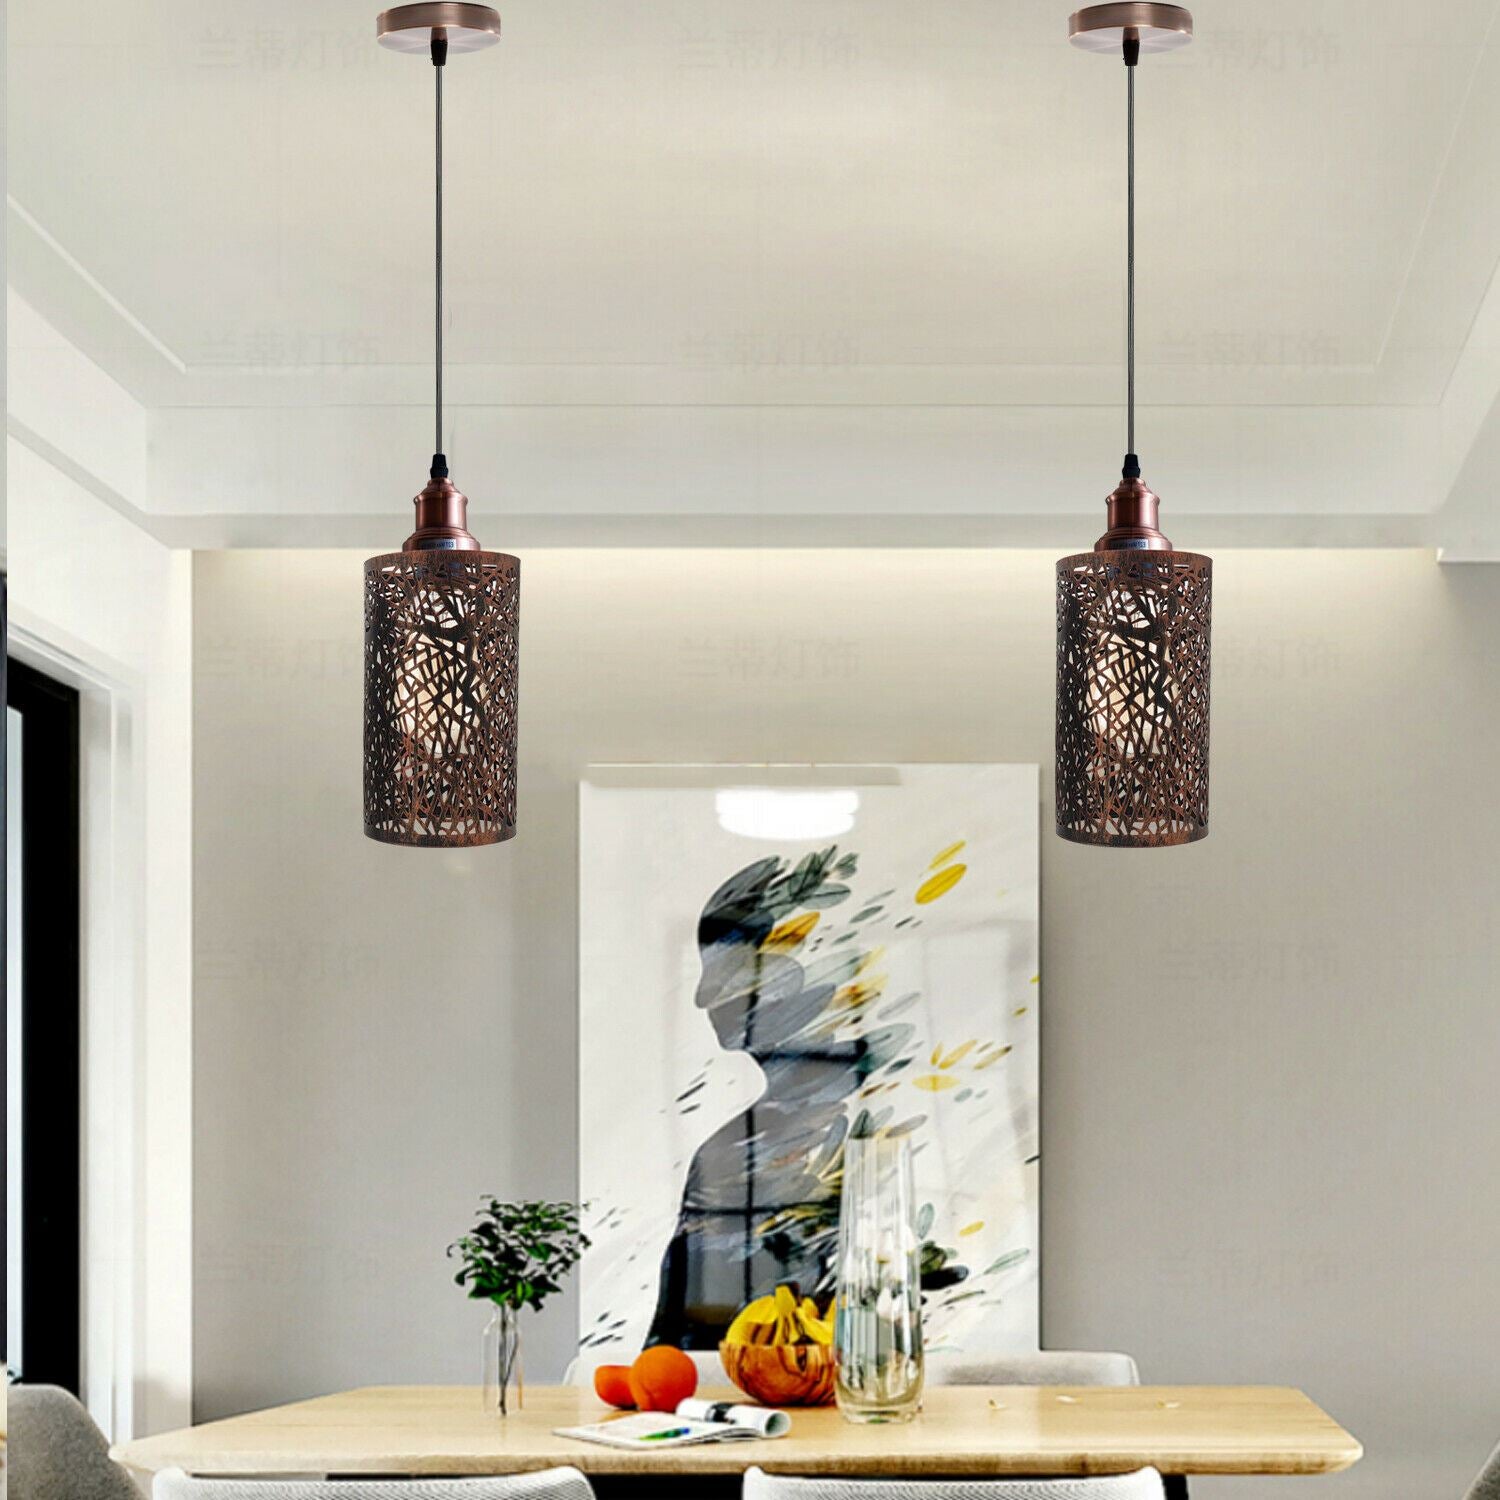 Modern Metal Cage Ceiling Lamp Shade Pendant Light with 95cm Adjustable Cable - Application Image 1